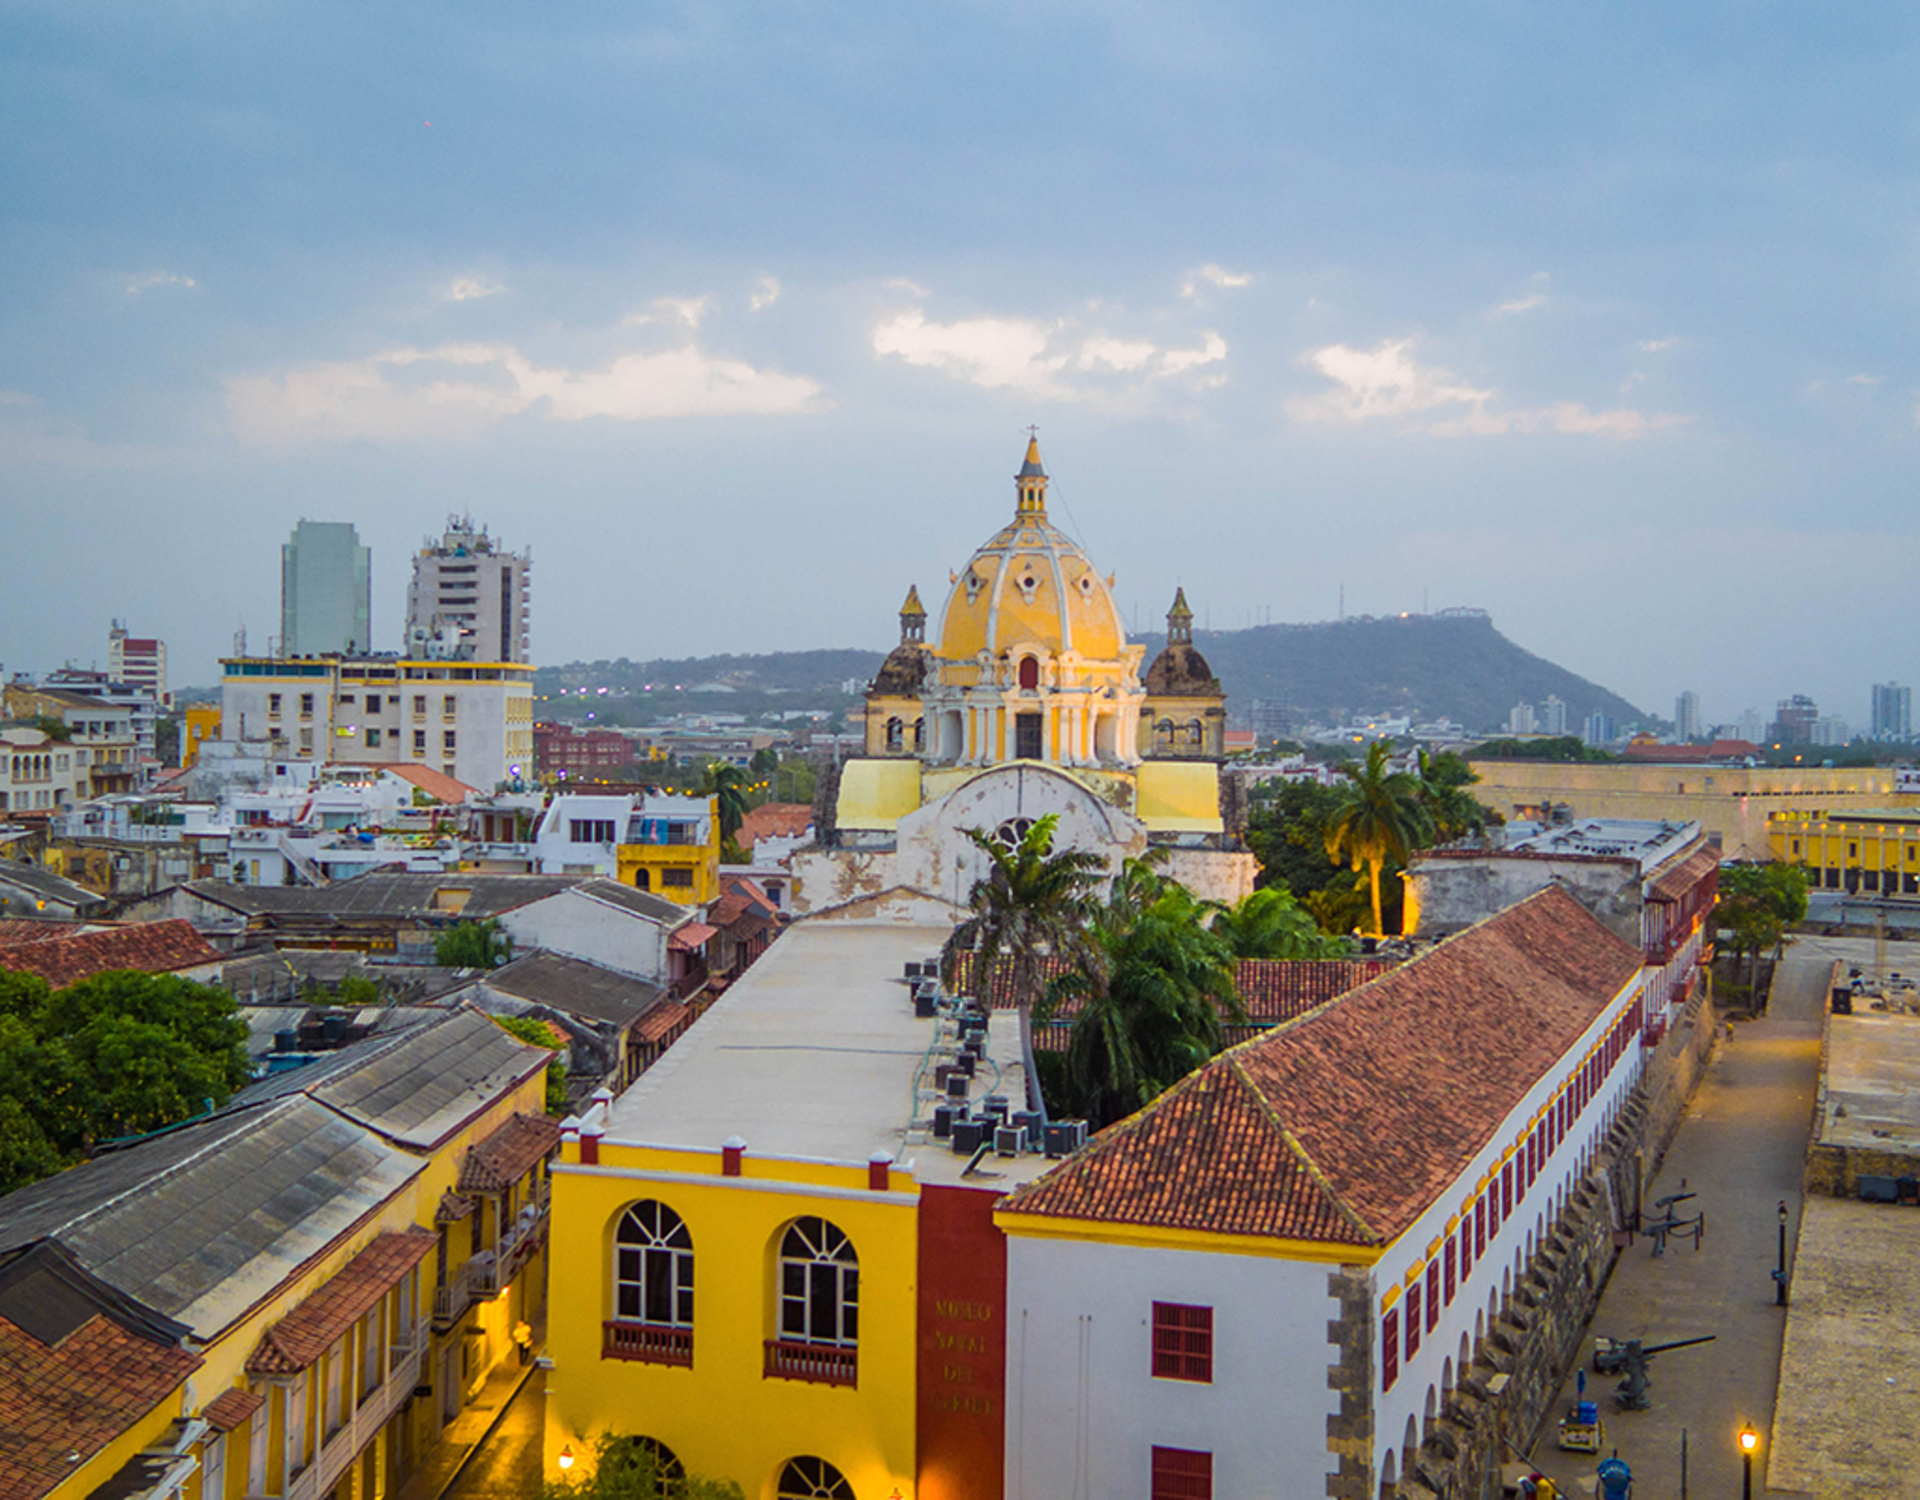 Cartagena Walled City and Getsemaní Private Tour